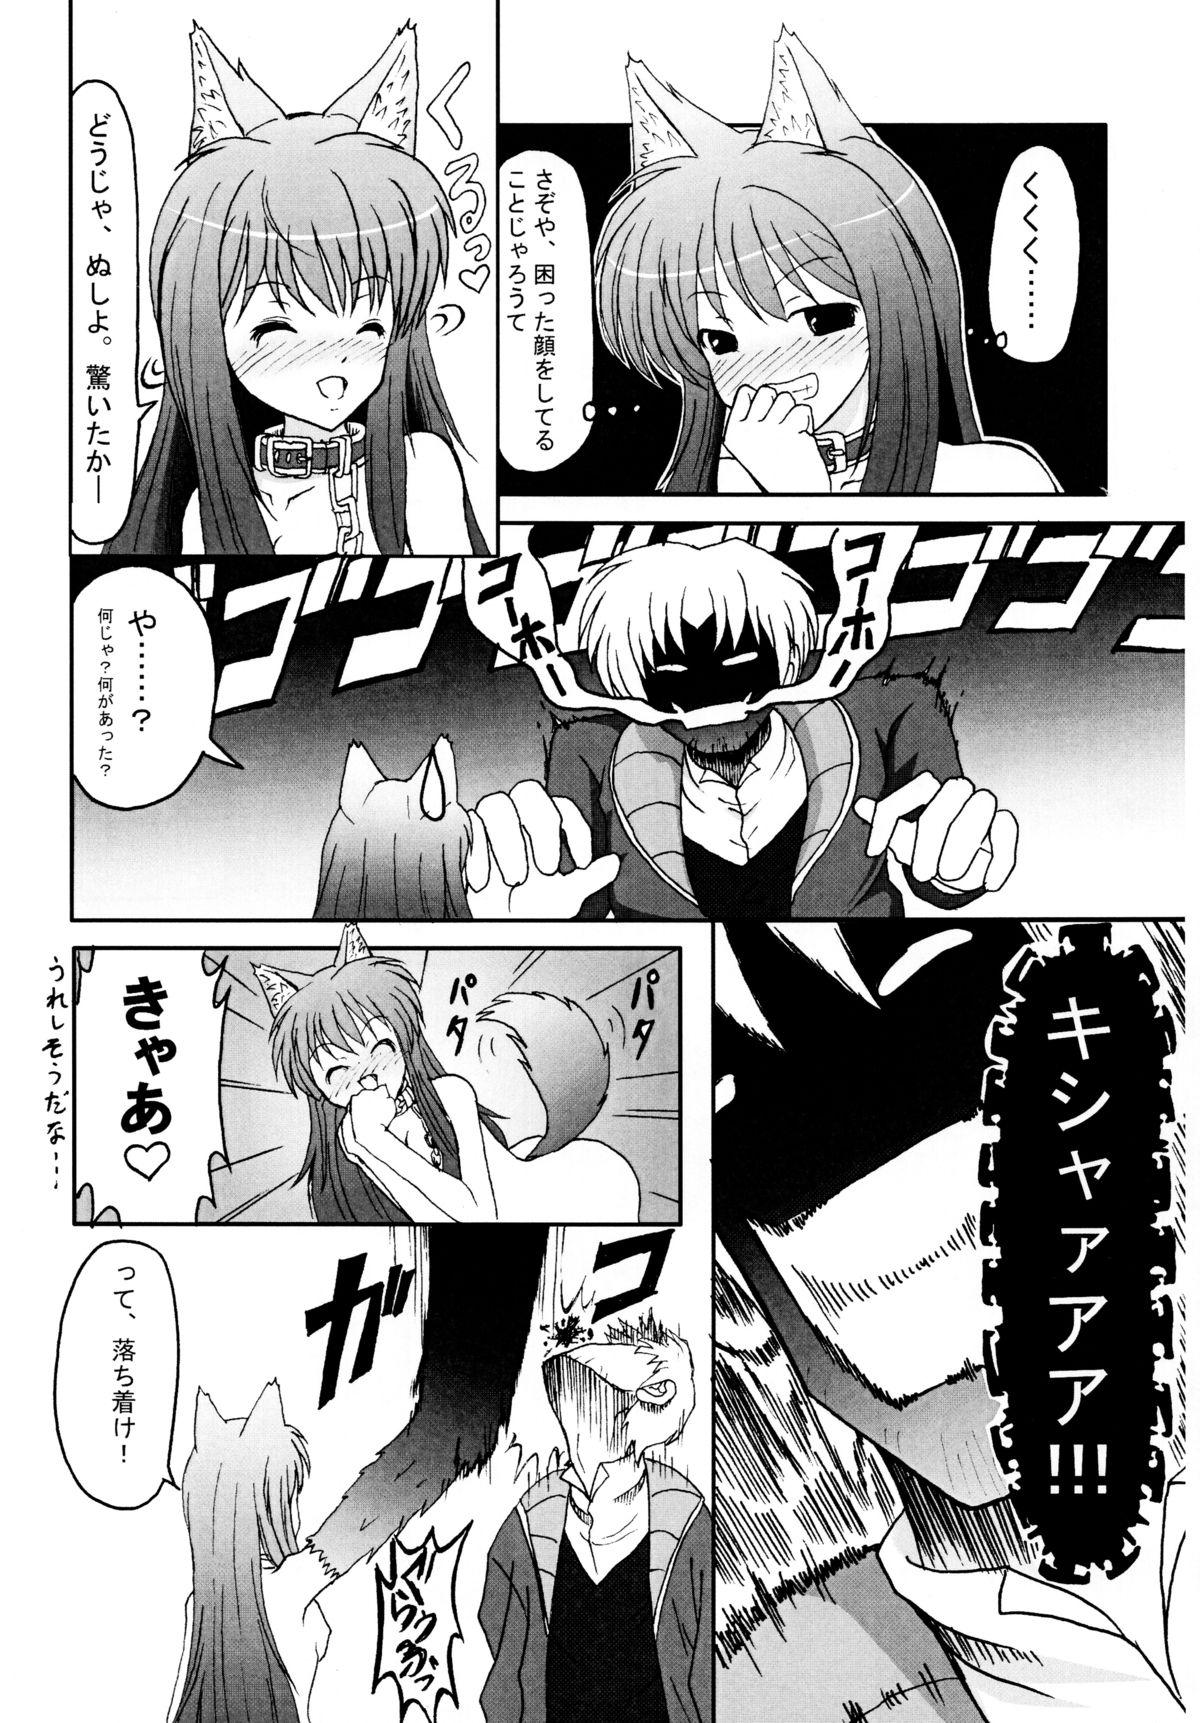 Shecock Ookami to Ai no Kusari - Spice and wolf Mmf - Page 9